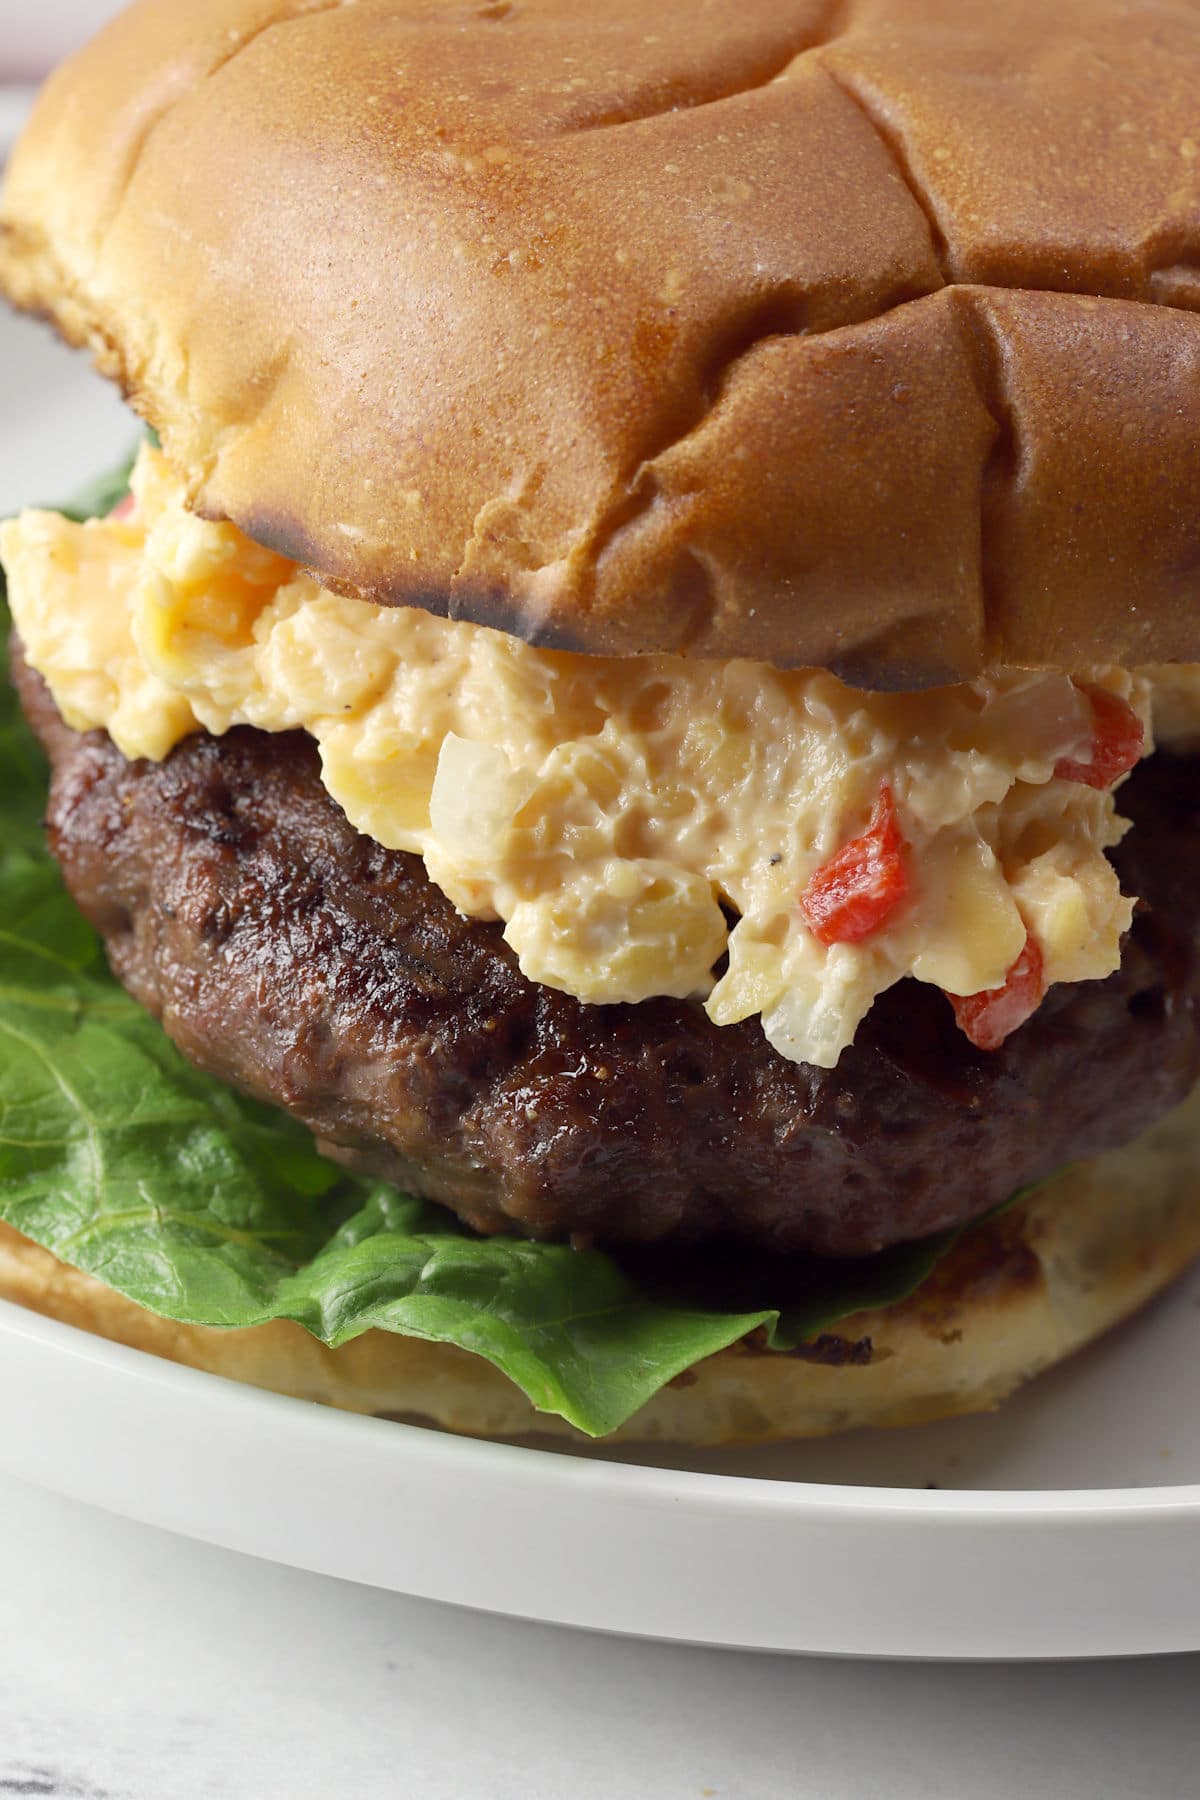 Close up of bison burger and creamy pimento cheese on a toasted bun.